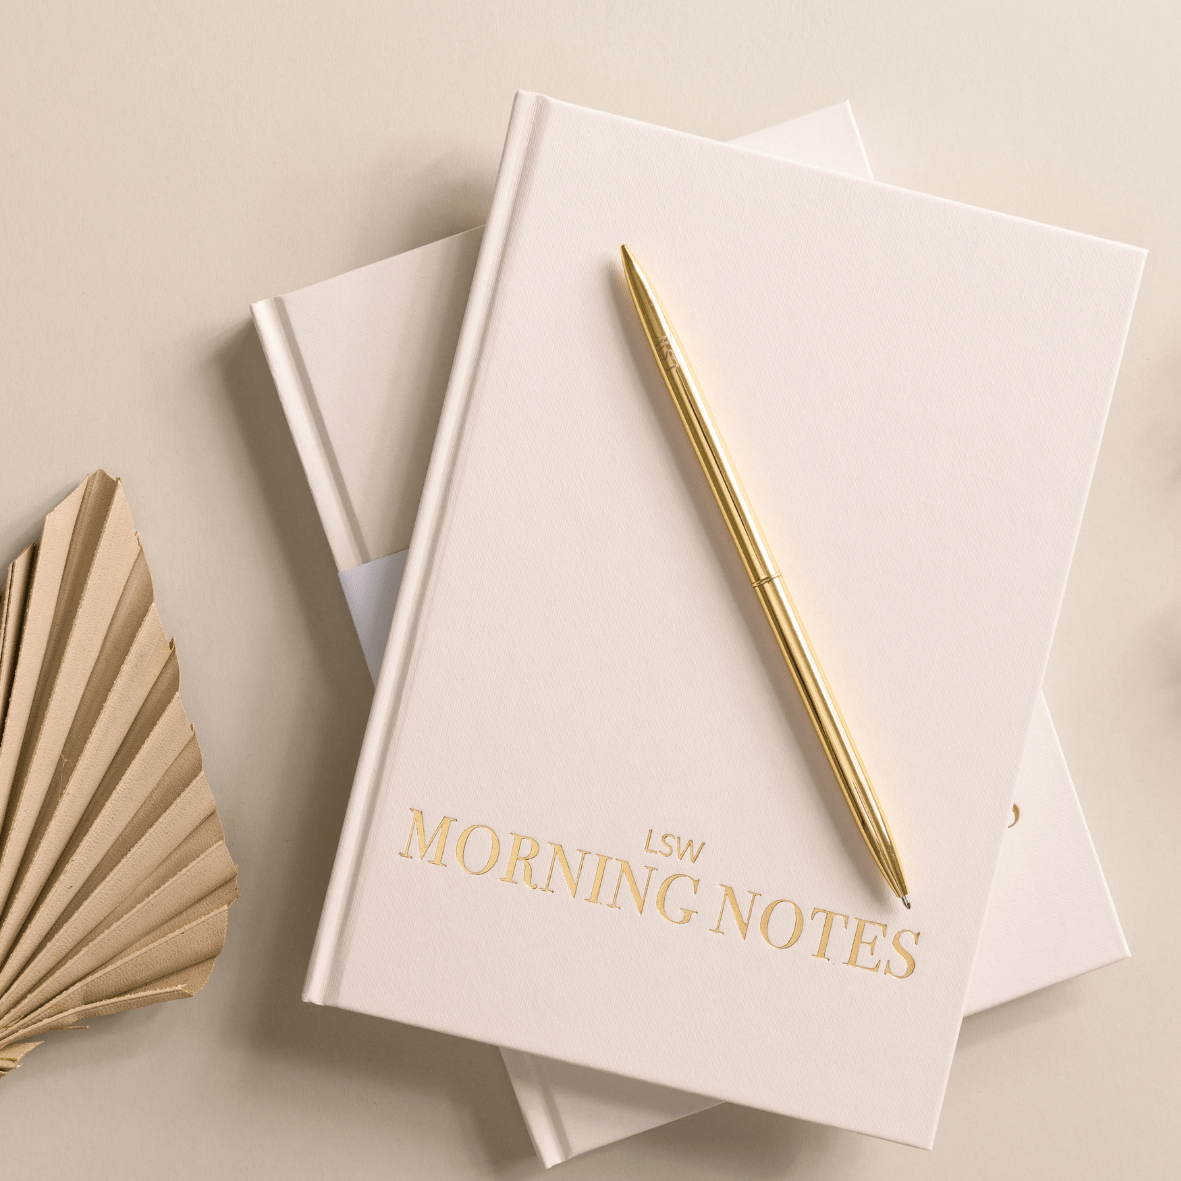 Morning Notes - Daily wellbeing journal LSW with a gold pen on top